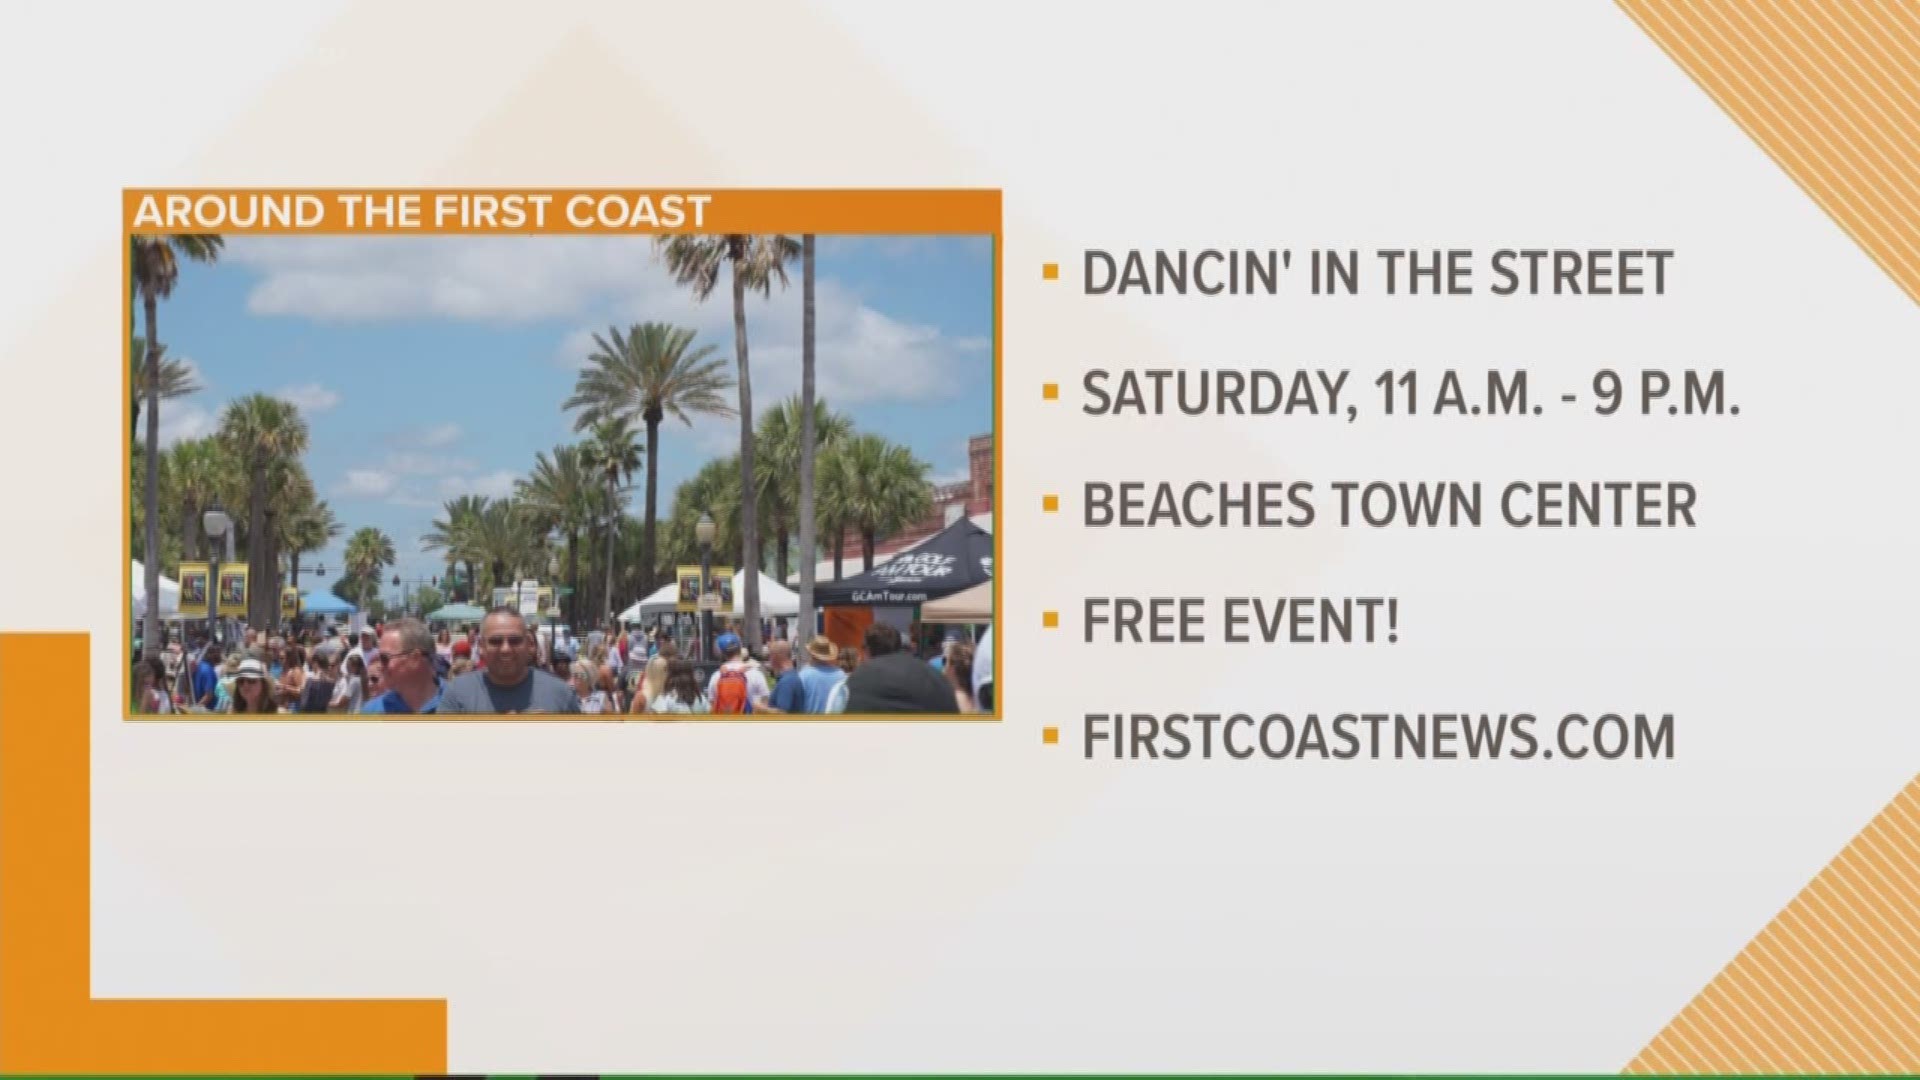 Some top events all around the First Coast.